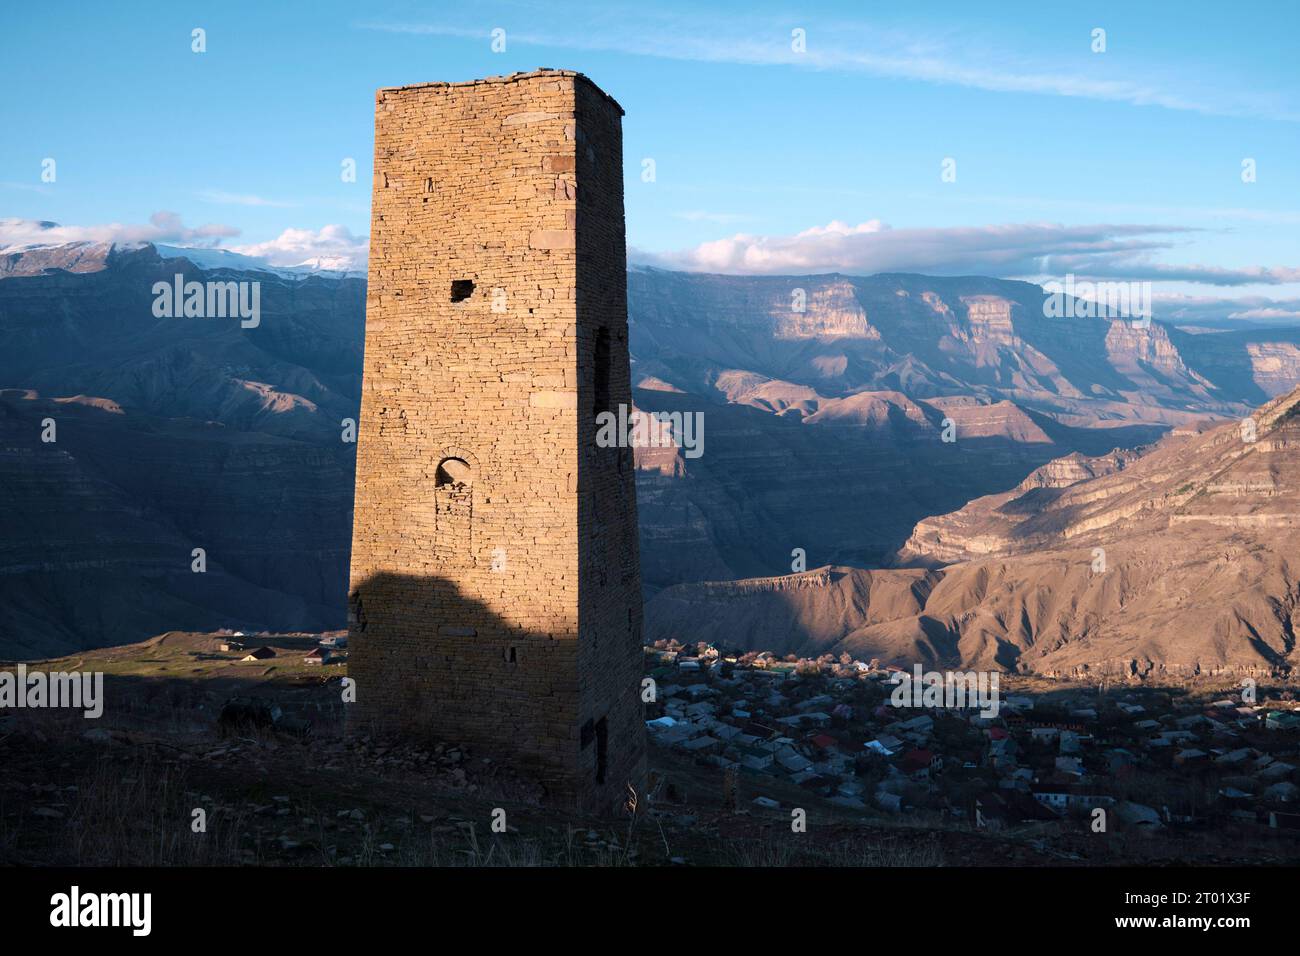 The ancient town tower in the village stands on the vibrant sunset. In the Dagestan Republic, during the beautiful golden hour, a charming old town tower in the village of Goor stands against the backdrop of stunning mountains, all bathed in the warm colors of the sunset. Stock Photo